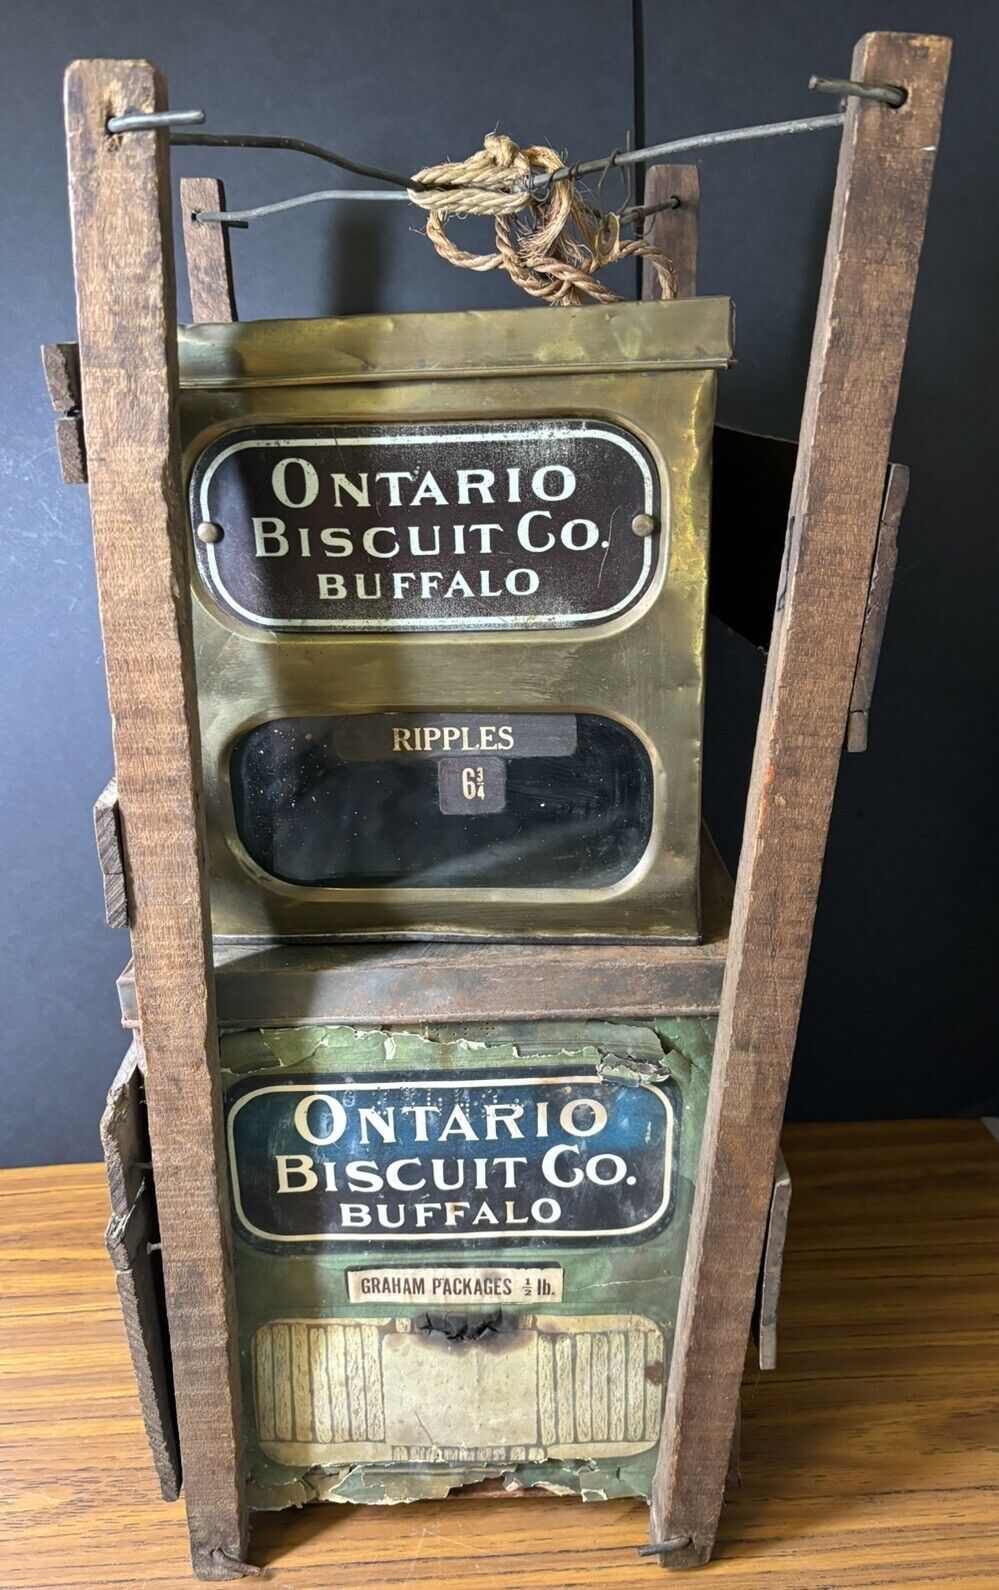 Ontario Biscuit Co Buffalo General Store Display Carrier Tin Glass Antique Early